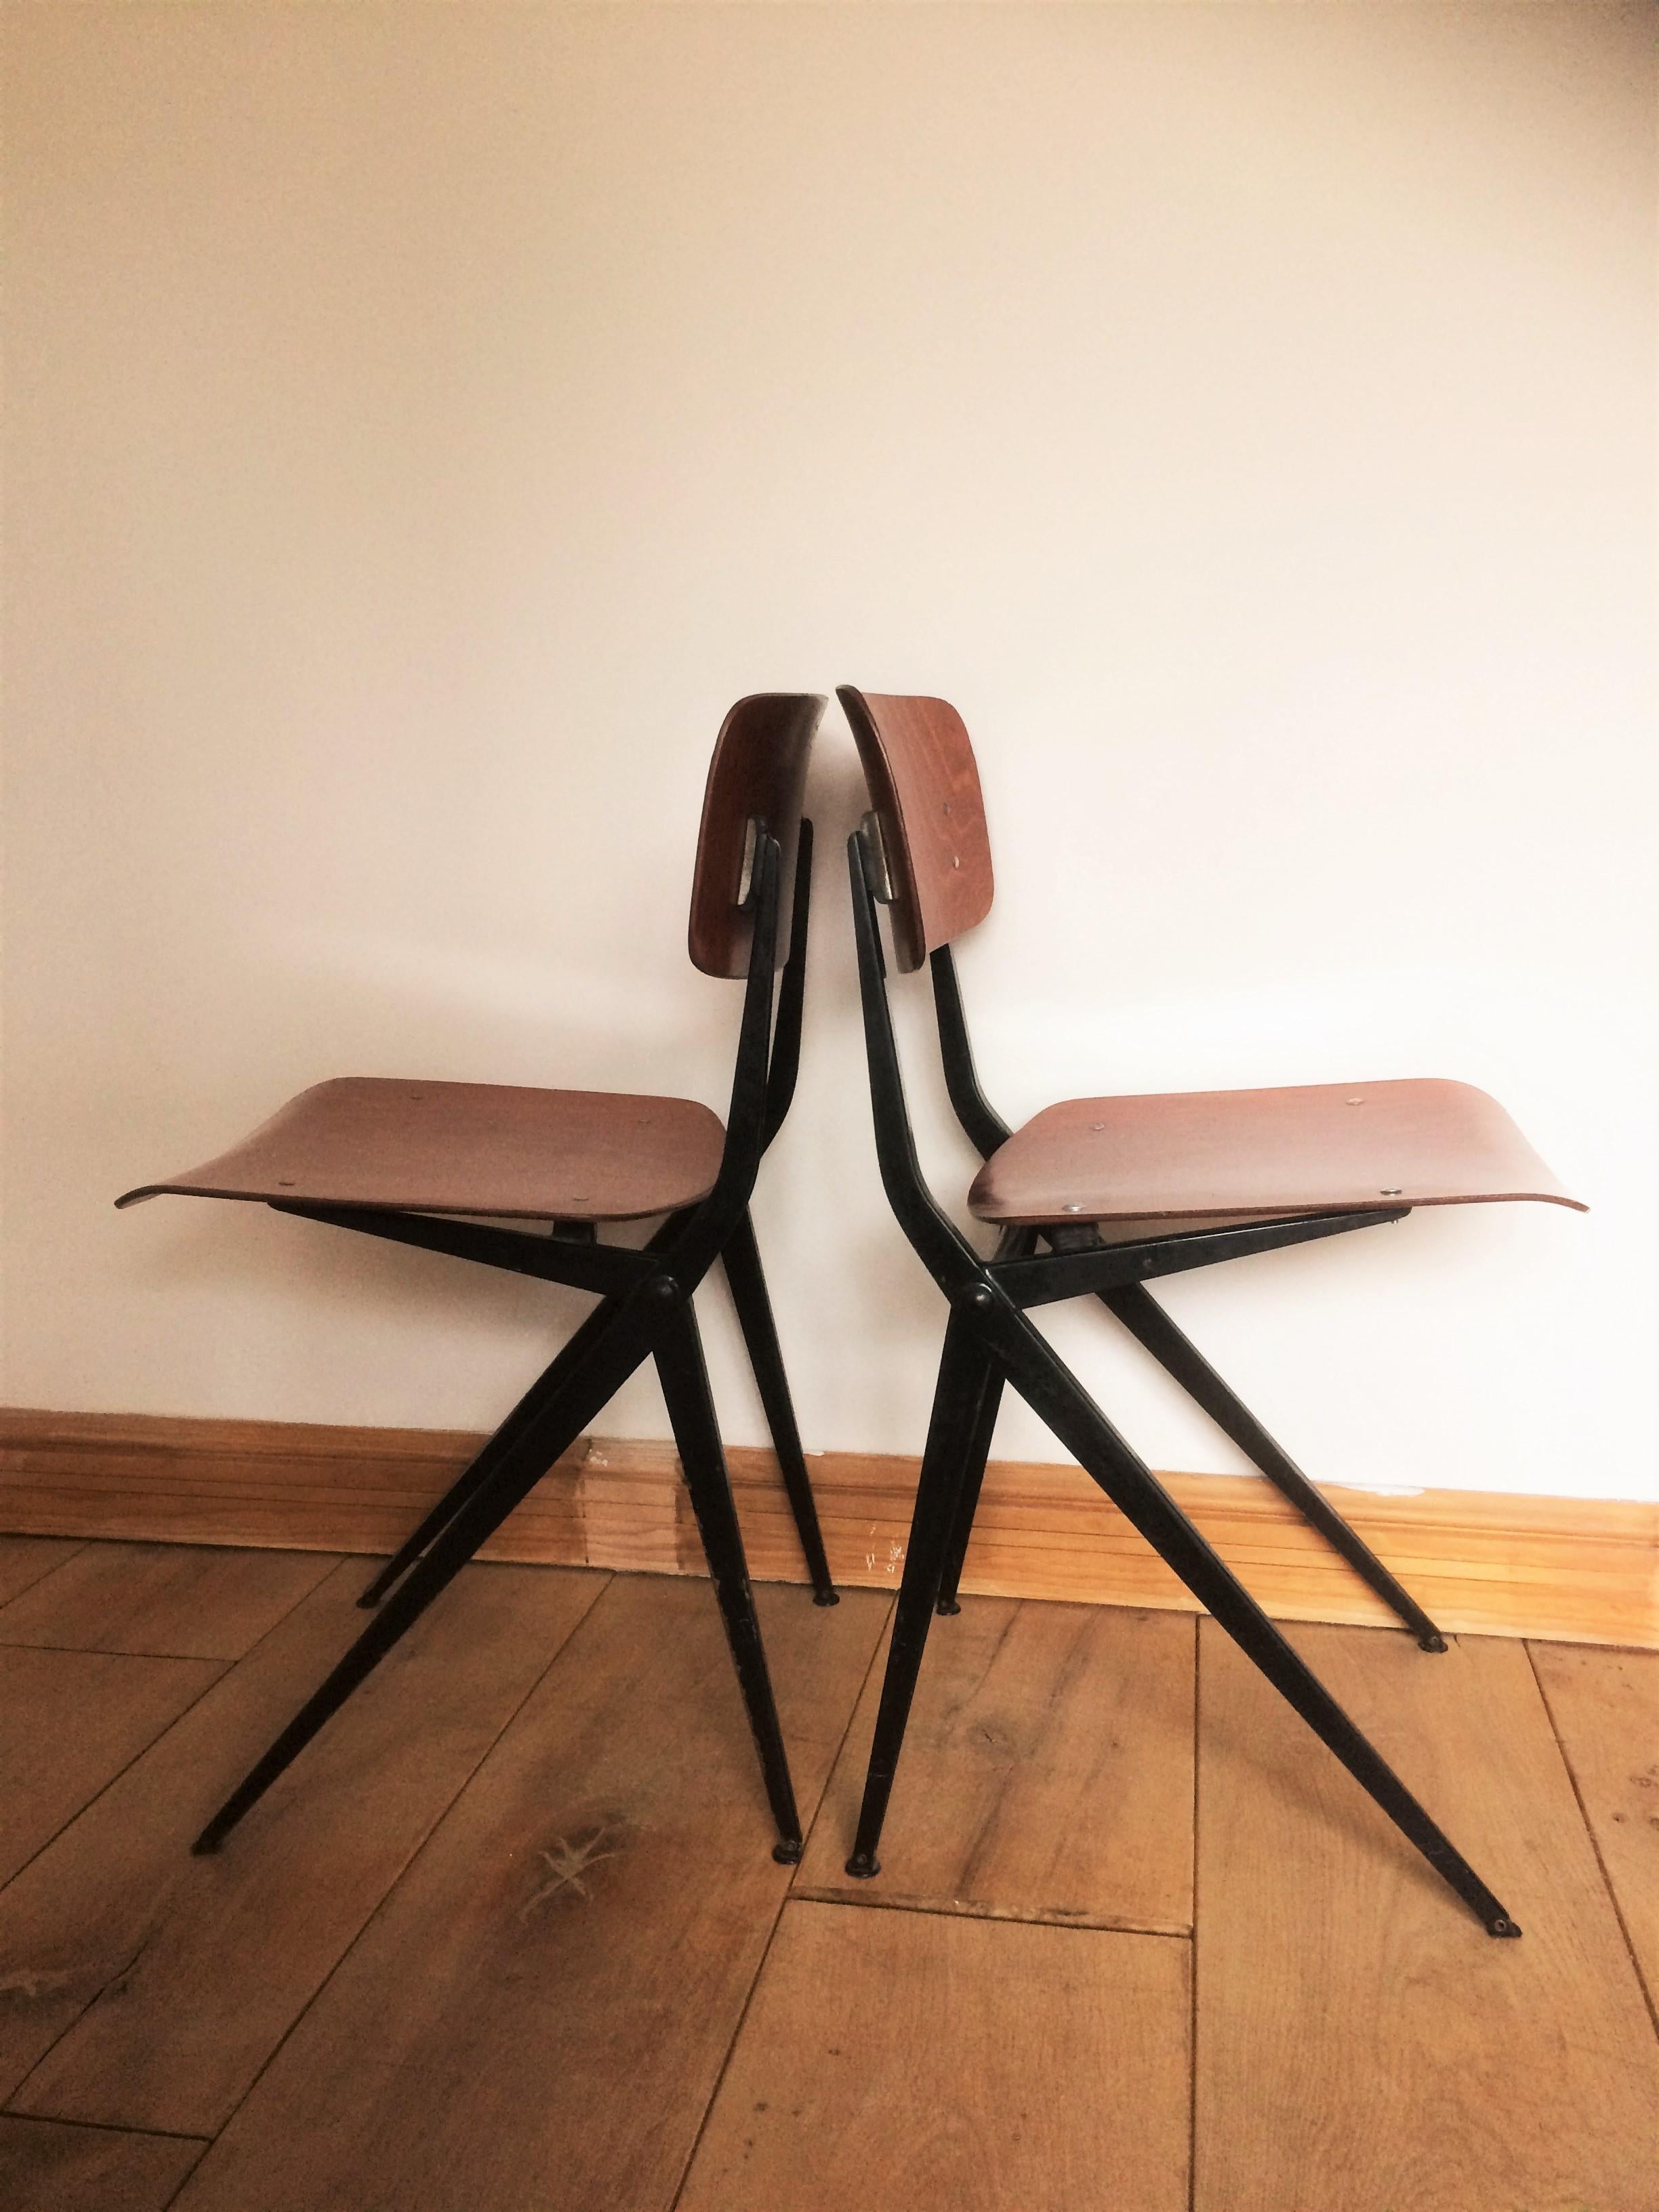 20th Century Industrial Pagwood Chairs by Ynske Kooistra for Marko, Set of 4 2